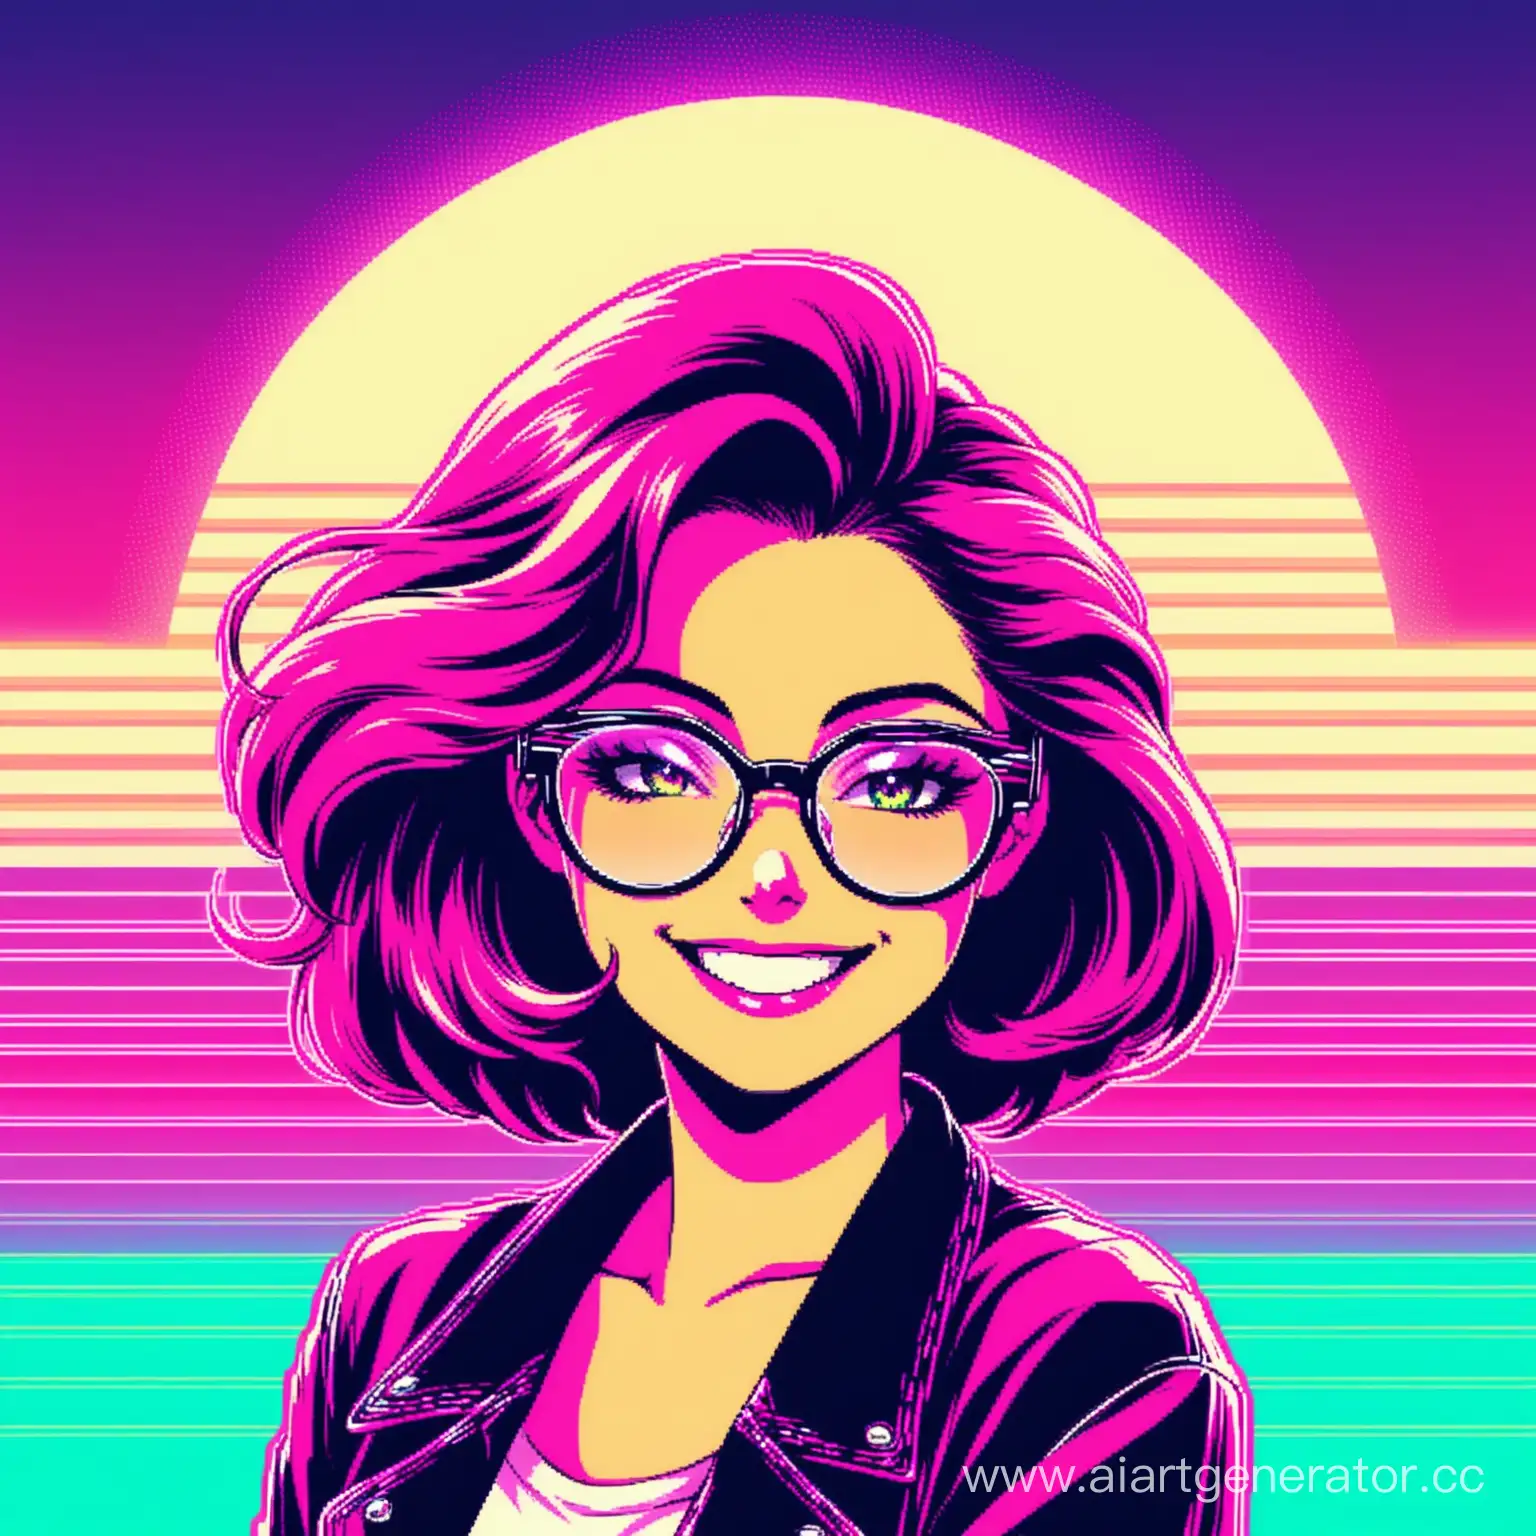 Smiling-Girl-in-Retro-Wave-Style-80s-Synth-Wave-Art